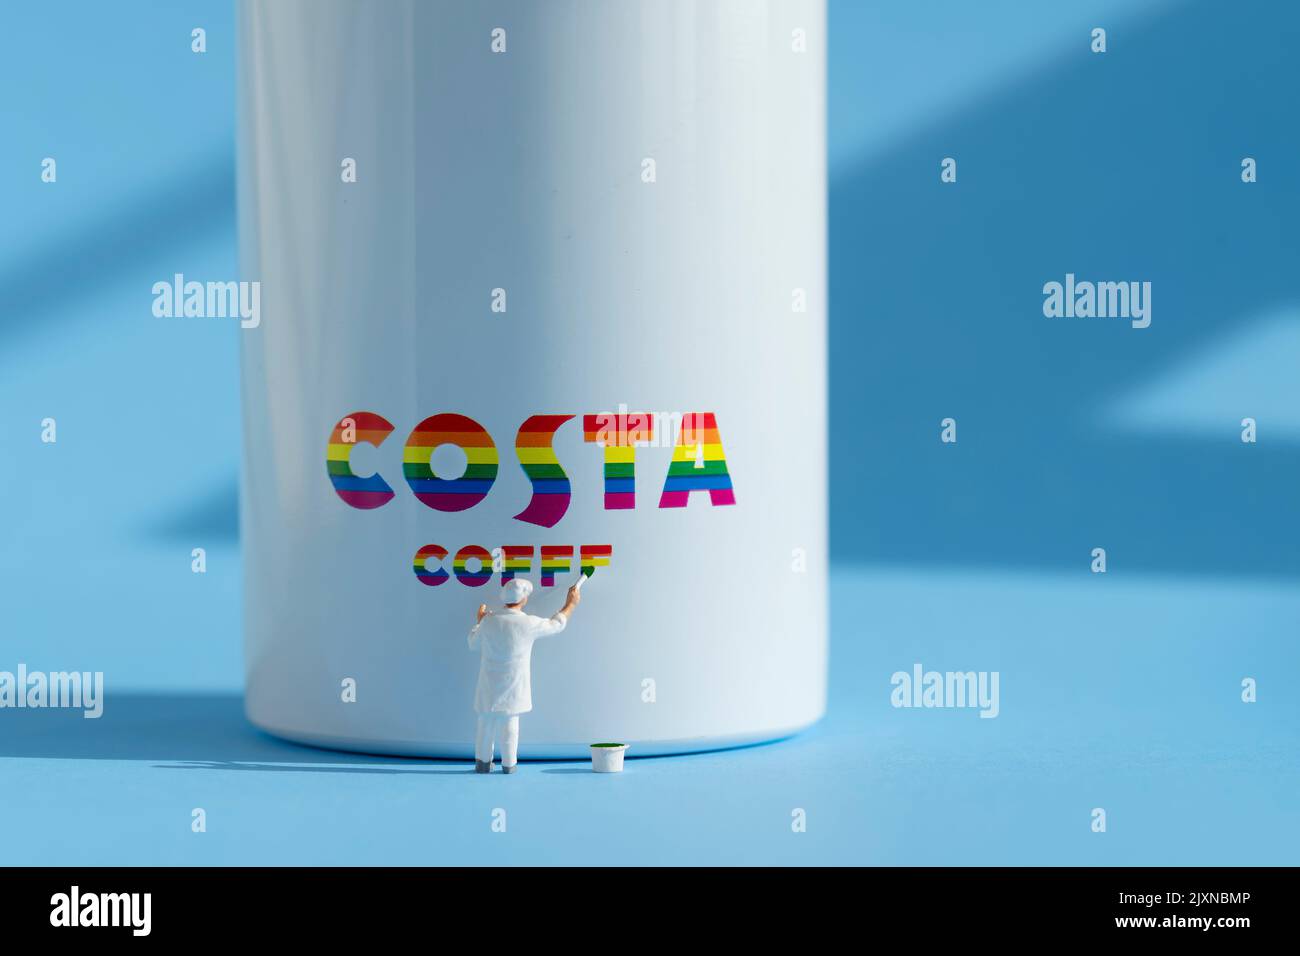 A small modelling painter figurine is shown painting a Costa logo onto the side of a water bottle. The branding is made out in LGBTQ rainbow colours Stock Photo